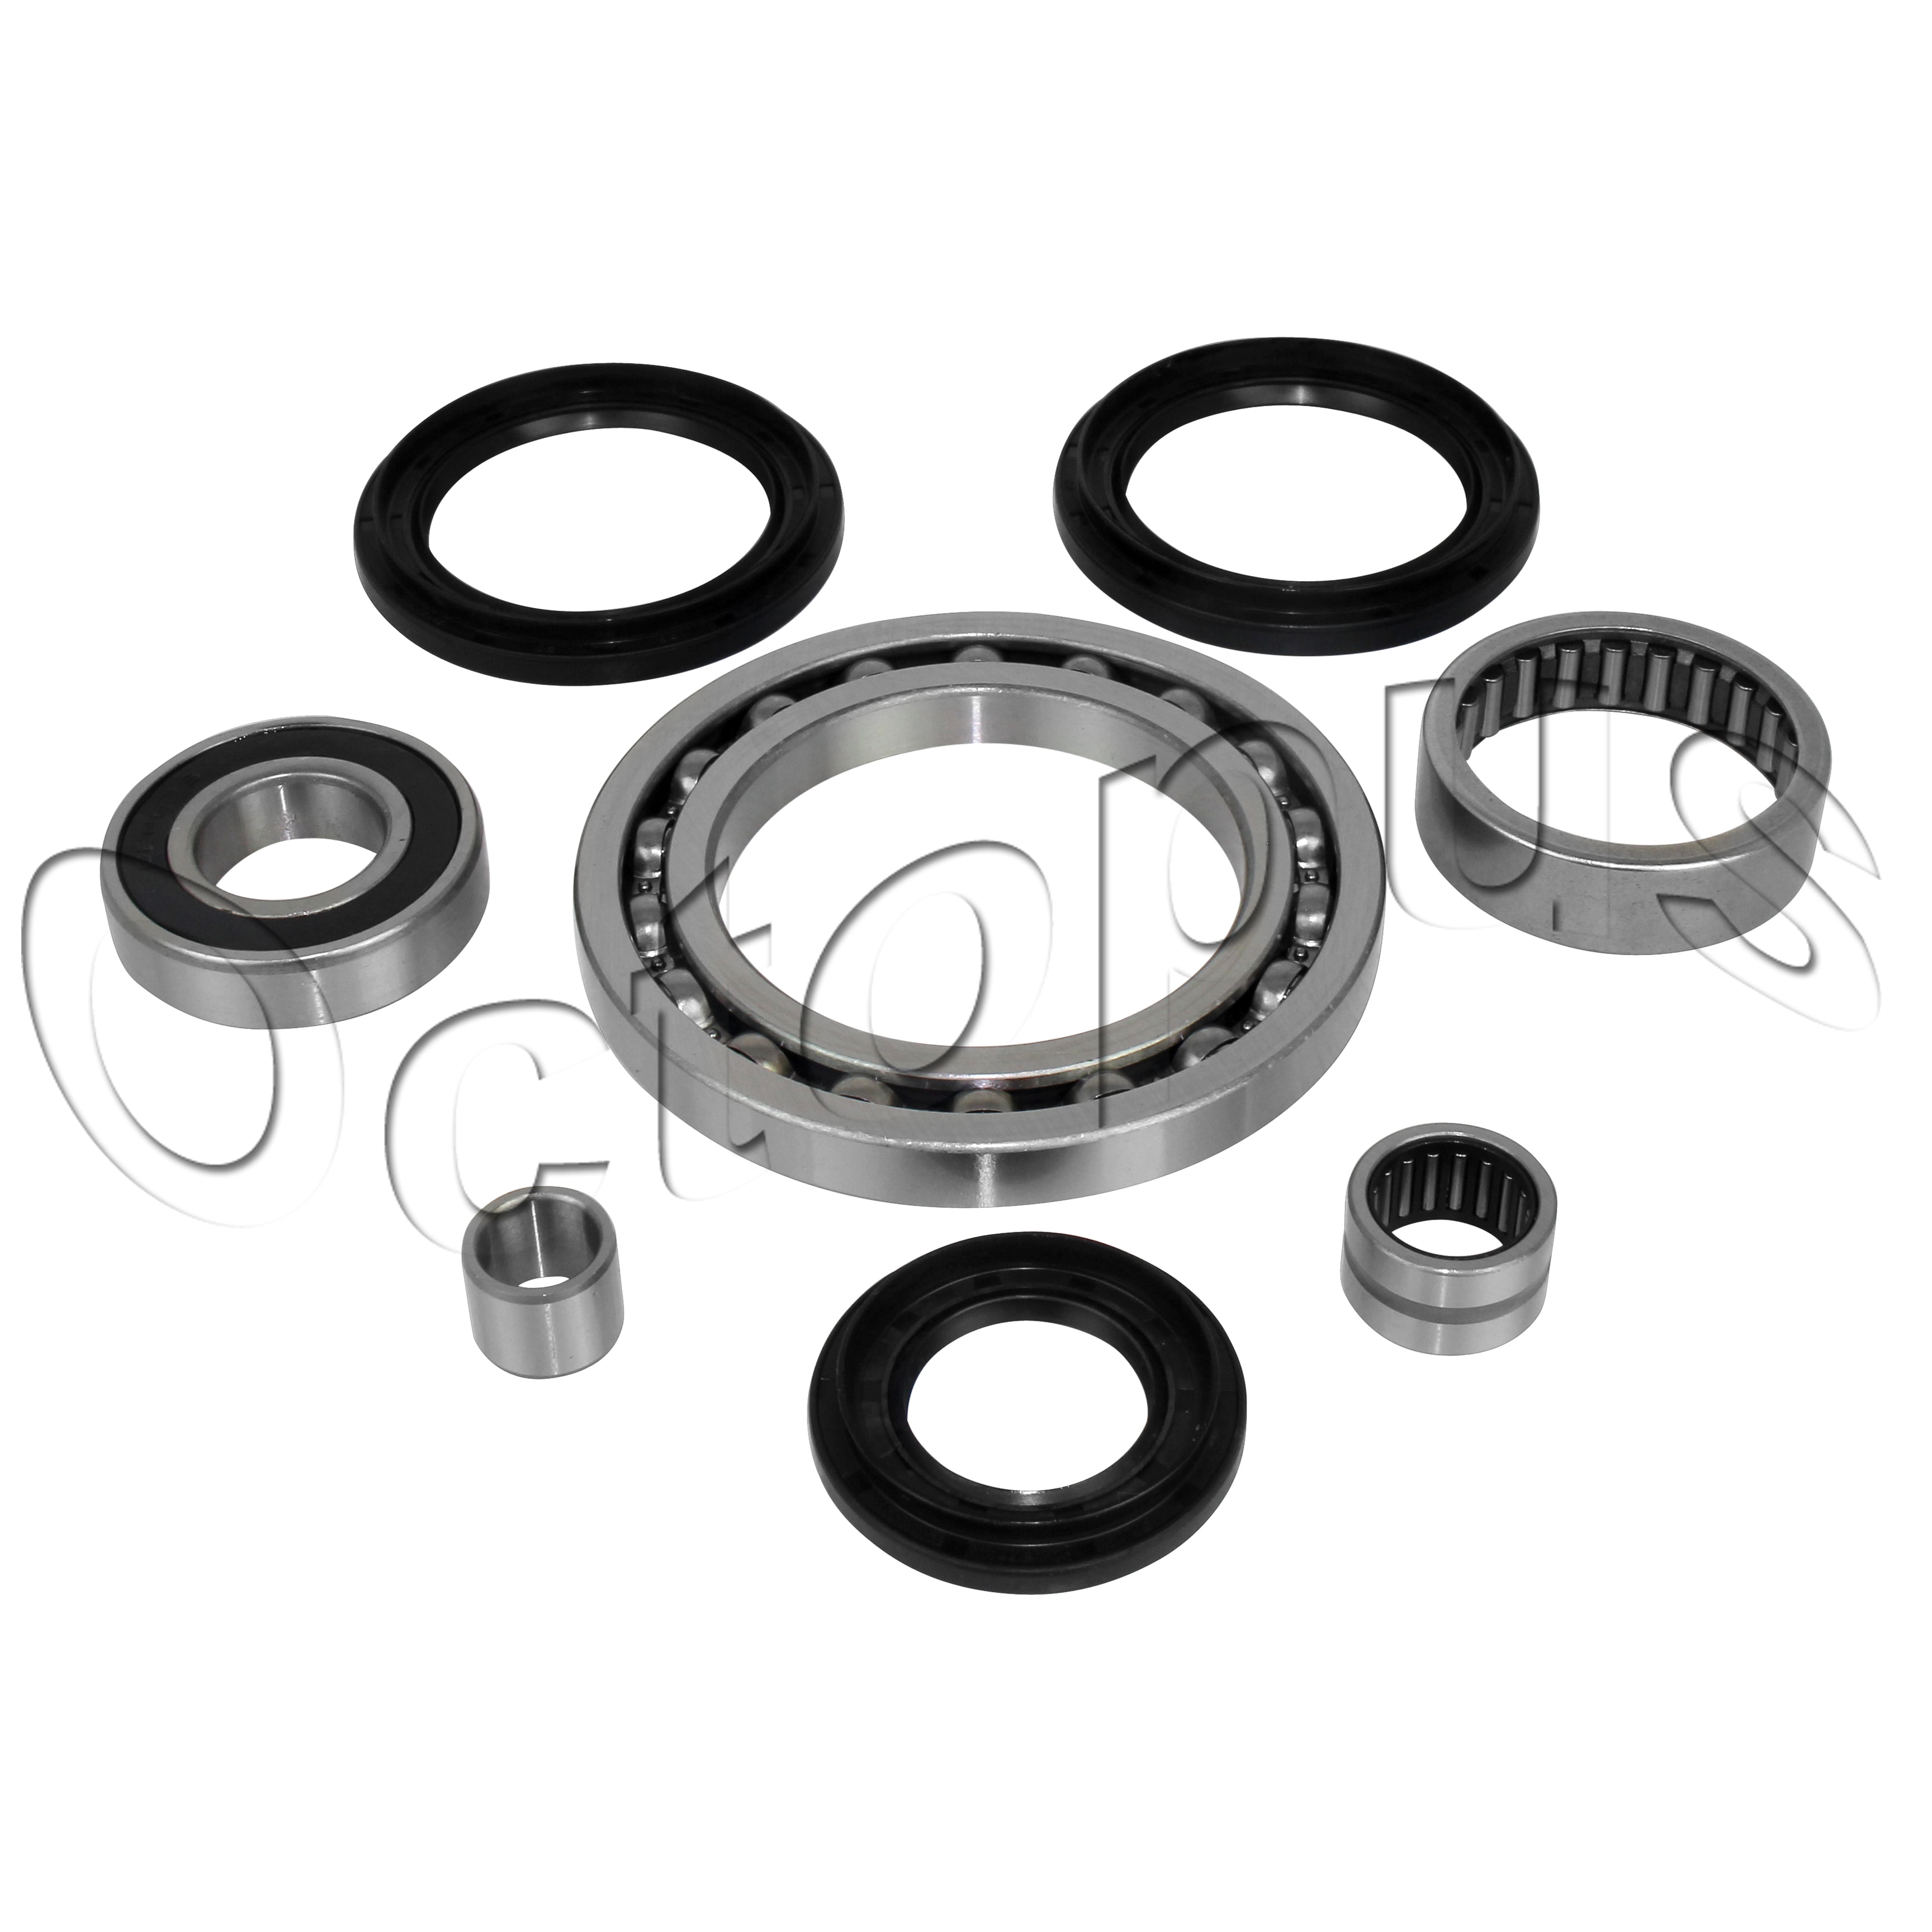 Details about   Yamaha ATV YXR66FA 660 Rhino 4x4 Bearings Seals for Rear Differential 2004-2007 